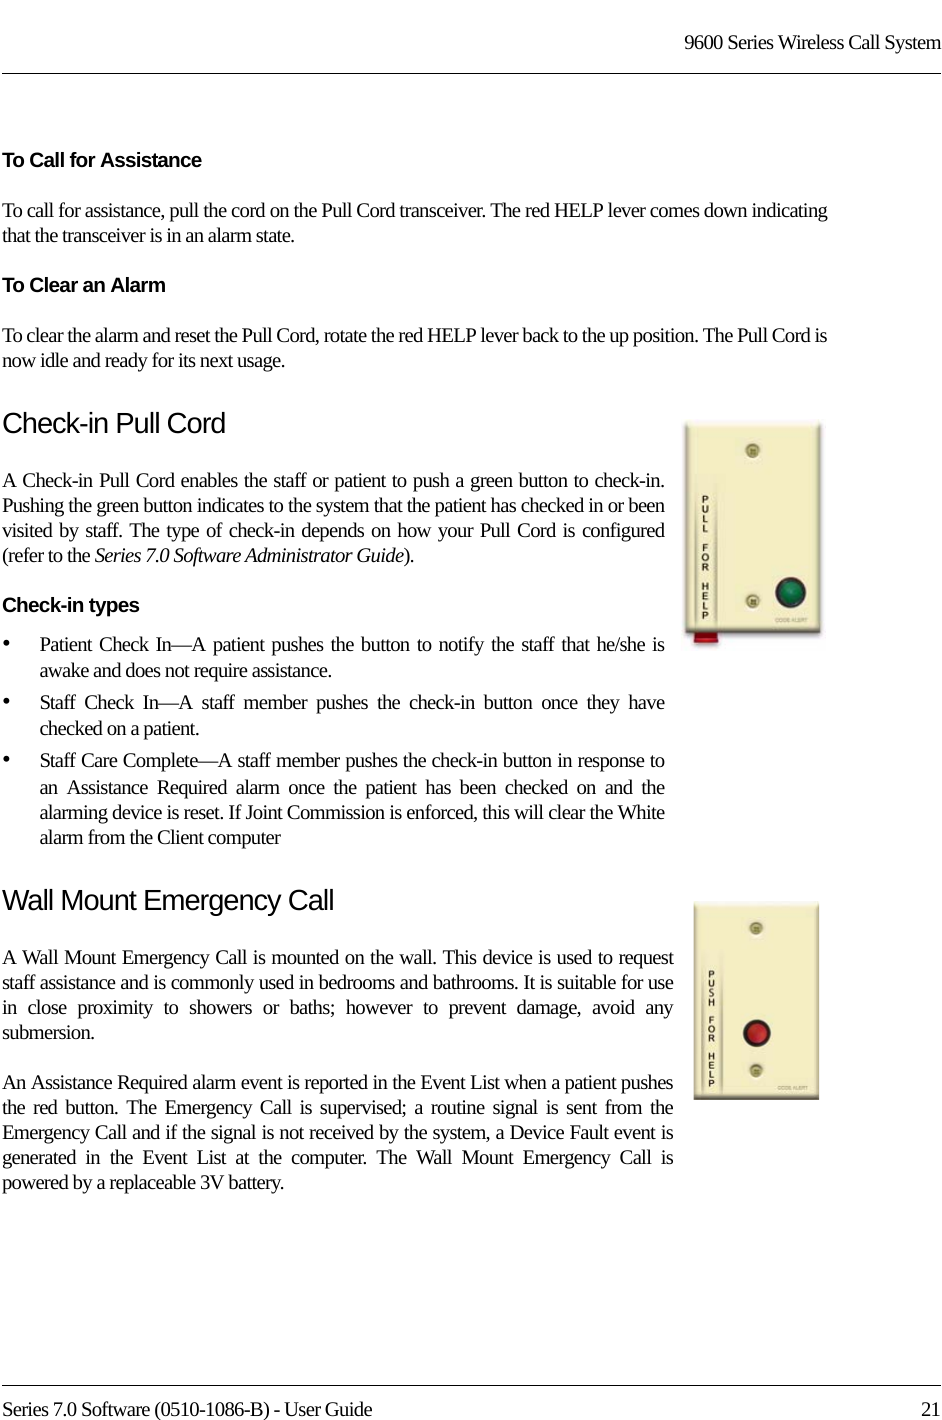 Series 7.0 Software (0510-1086-B) - User Guide  219600 Series Wireless Call SystemTo Call for AssistanceTo call for assistance, pull the cord on the Pull Cord transceiver. The red HELP lever comes down indicating that the transceiver is in an alarm state. To Clear an AlarmTo clear the alarm and reset the Pull Cord, rotate the red HELP lever back to the up position. The Pull Cord is now idle and ready for its next usage.Check-in Pull CordA Check-in Pull Cord enables the staff or patient to push a green button to check-in. Pushing the green button indicates to the system that the patient has checked in or been visited by staff. The type of check-in depends on how your Pull Cord is configured (refer to the Series 7.0 Software Administrator Guide).Check-in types•Patient Check In—A patient pushes the button to notify the staff that he/she is awake and does not require assistance. •Staff Check In—A staff member pushes the check-in button once they have checked on a patient. •Staff Care Complete—A staff member pushes the check-in button in response to an Assistance Required alarm once the patient has been checked on and the alarming device is reset. If Joint Commission is enforced, this will clear the White alarm from the Client computerWall Mount Emergency CallA Wall Mount Emergency Call is mounted on the wall. This device is used to request staff assistance and is commonly used in bedrooms and bathrooms. It is suitable for use in close proximity to showers or baths; however to prevent damage, avoid any submersion.An Assistance Required alarm event is reported in the Event List when a patient pushes the red button. The Emergency Call is supervised; a routine signal is sent from the Emergency Call and if the signal is not received by the system, a Device Fault event is generated in the Event List at the computer. The Wall Mount Emergency Call is powered by a replaceable 3V battery.